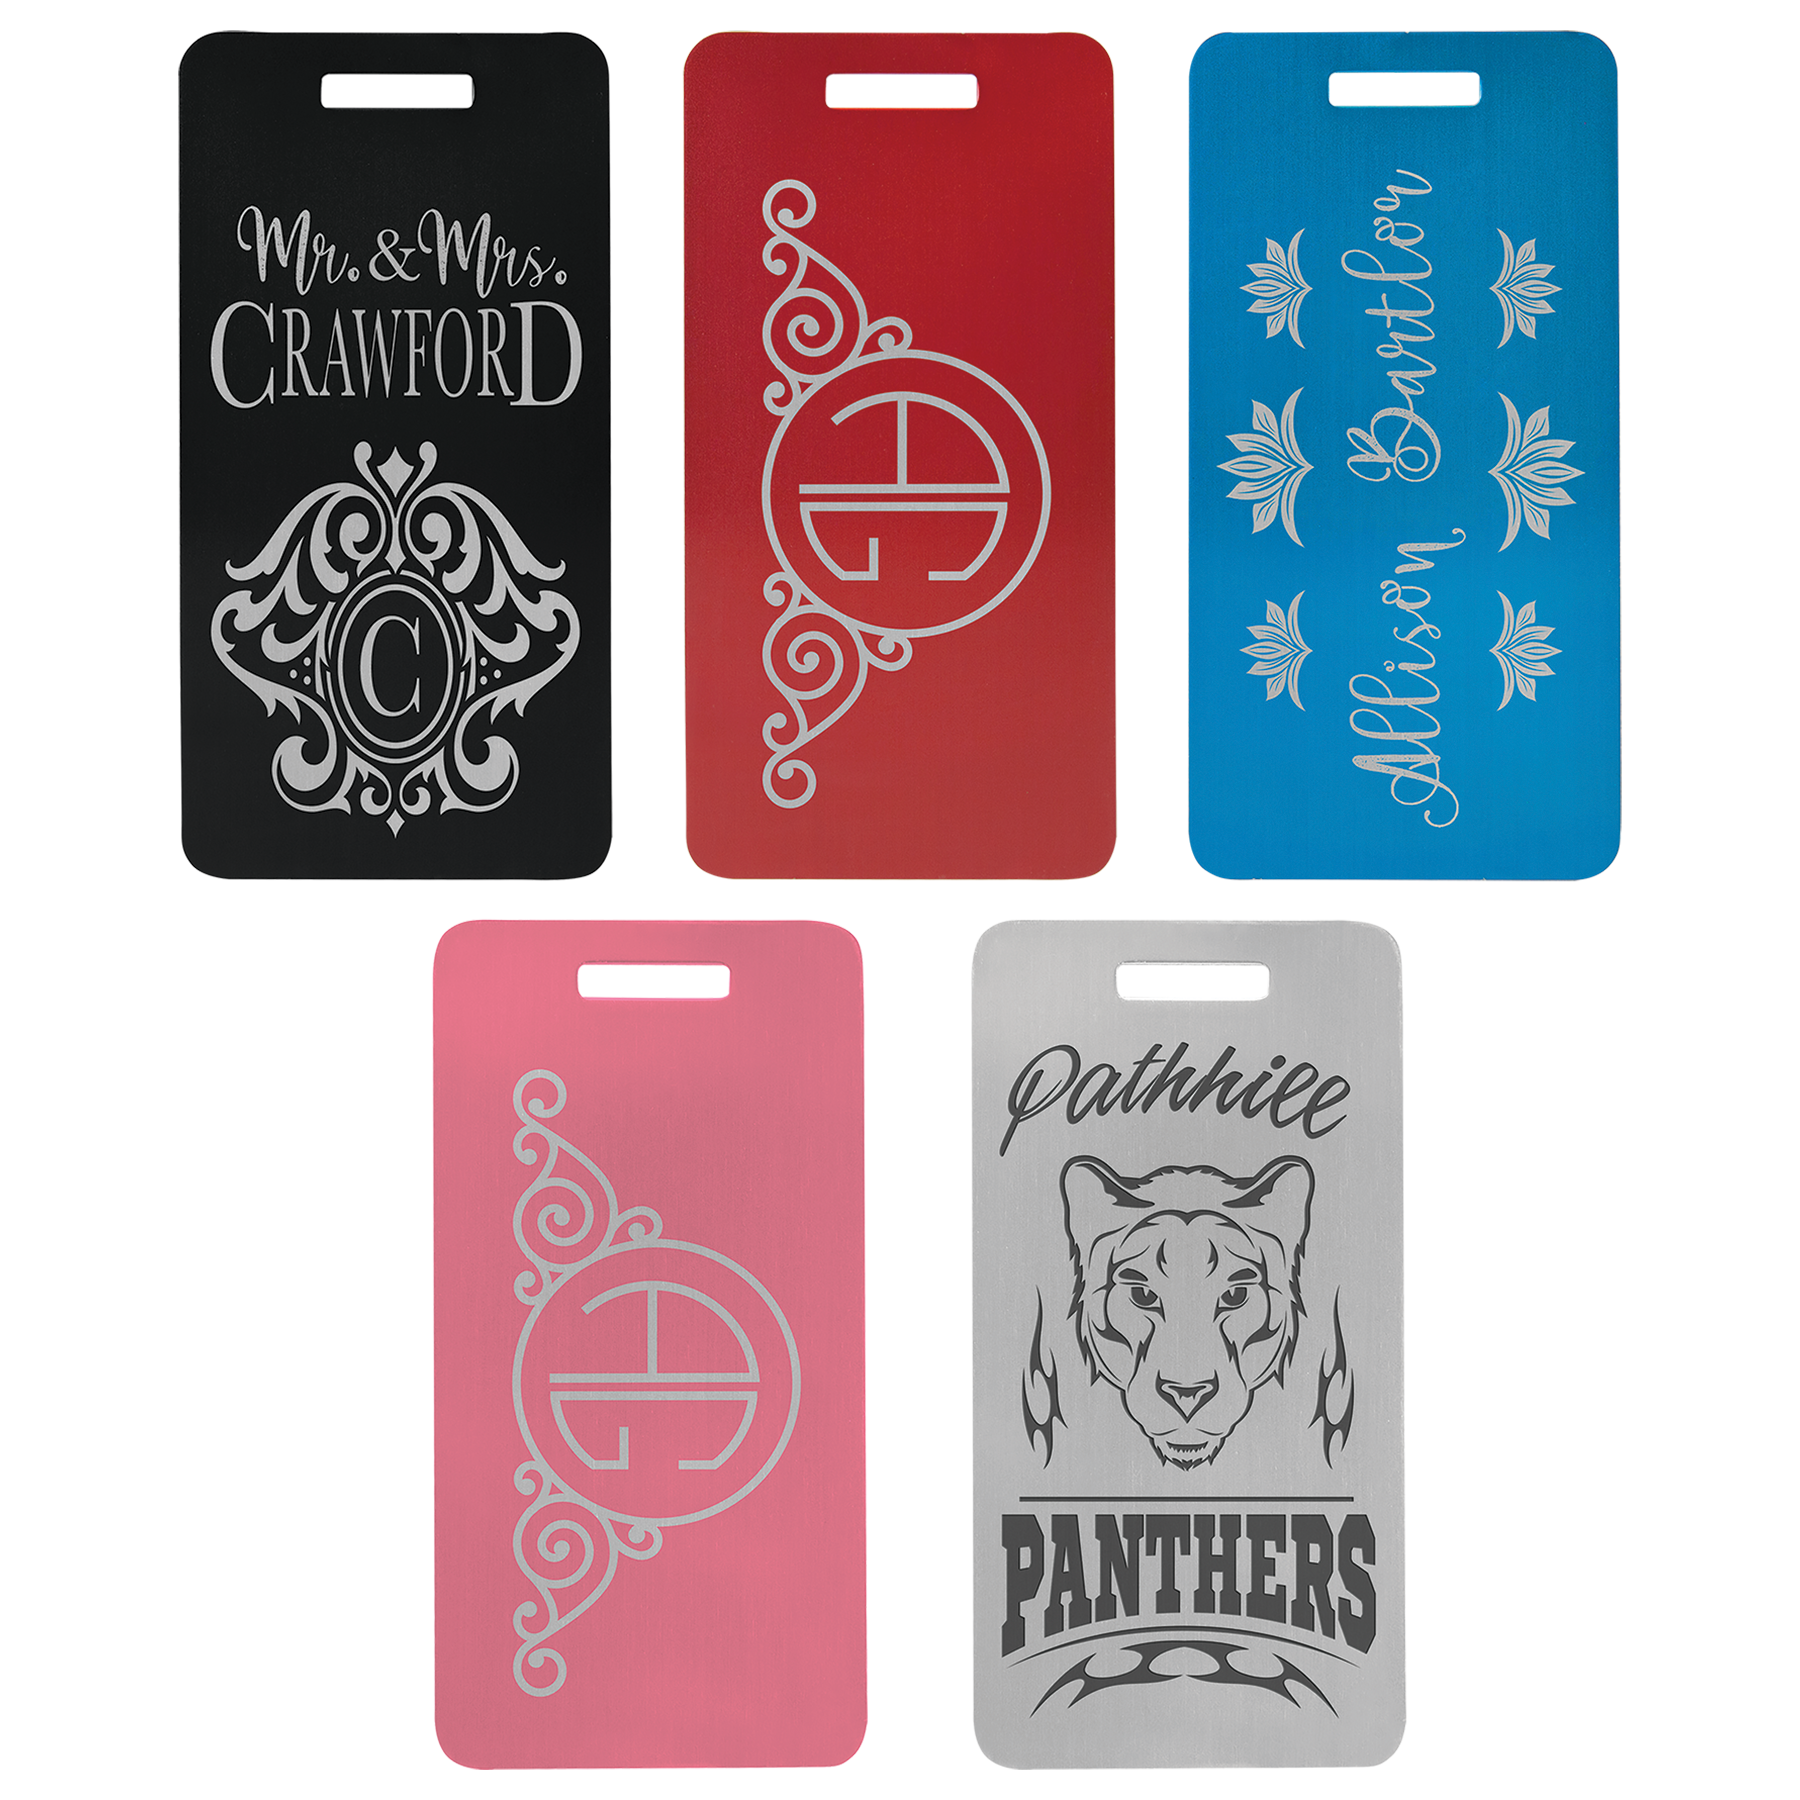 Custom Metal Luggage Tags, Design & Preview Online